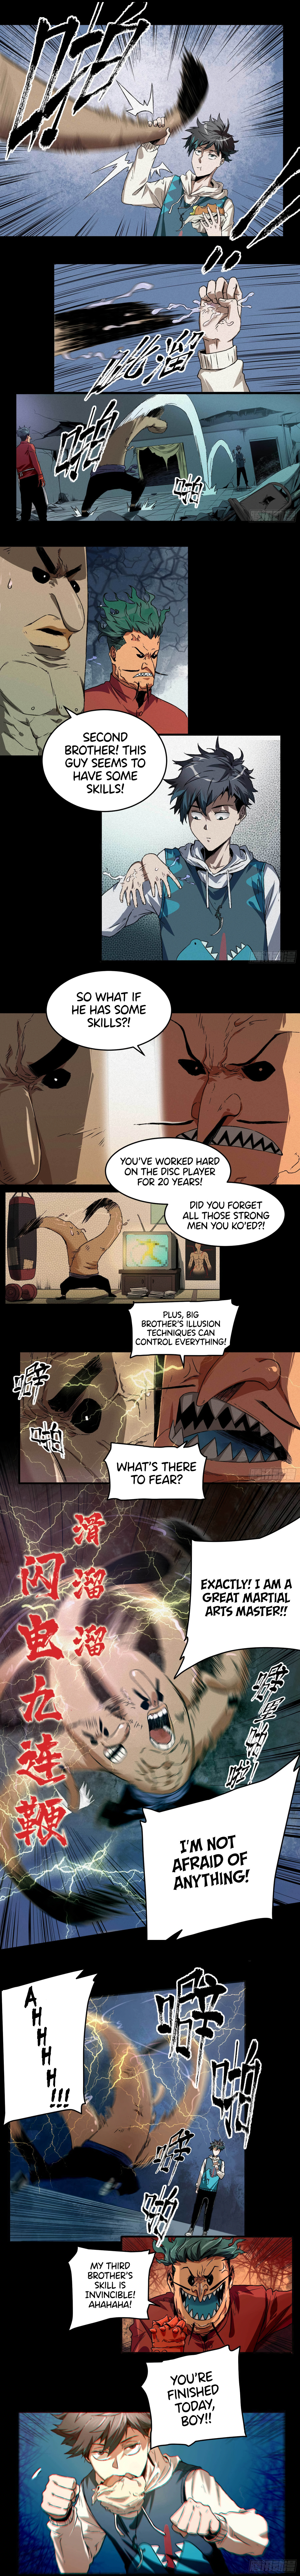 The Demon Is Ready For Dinner! - Page 2